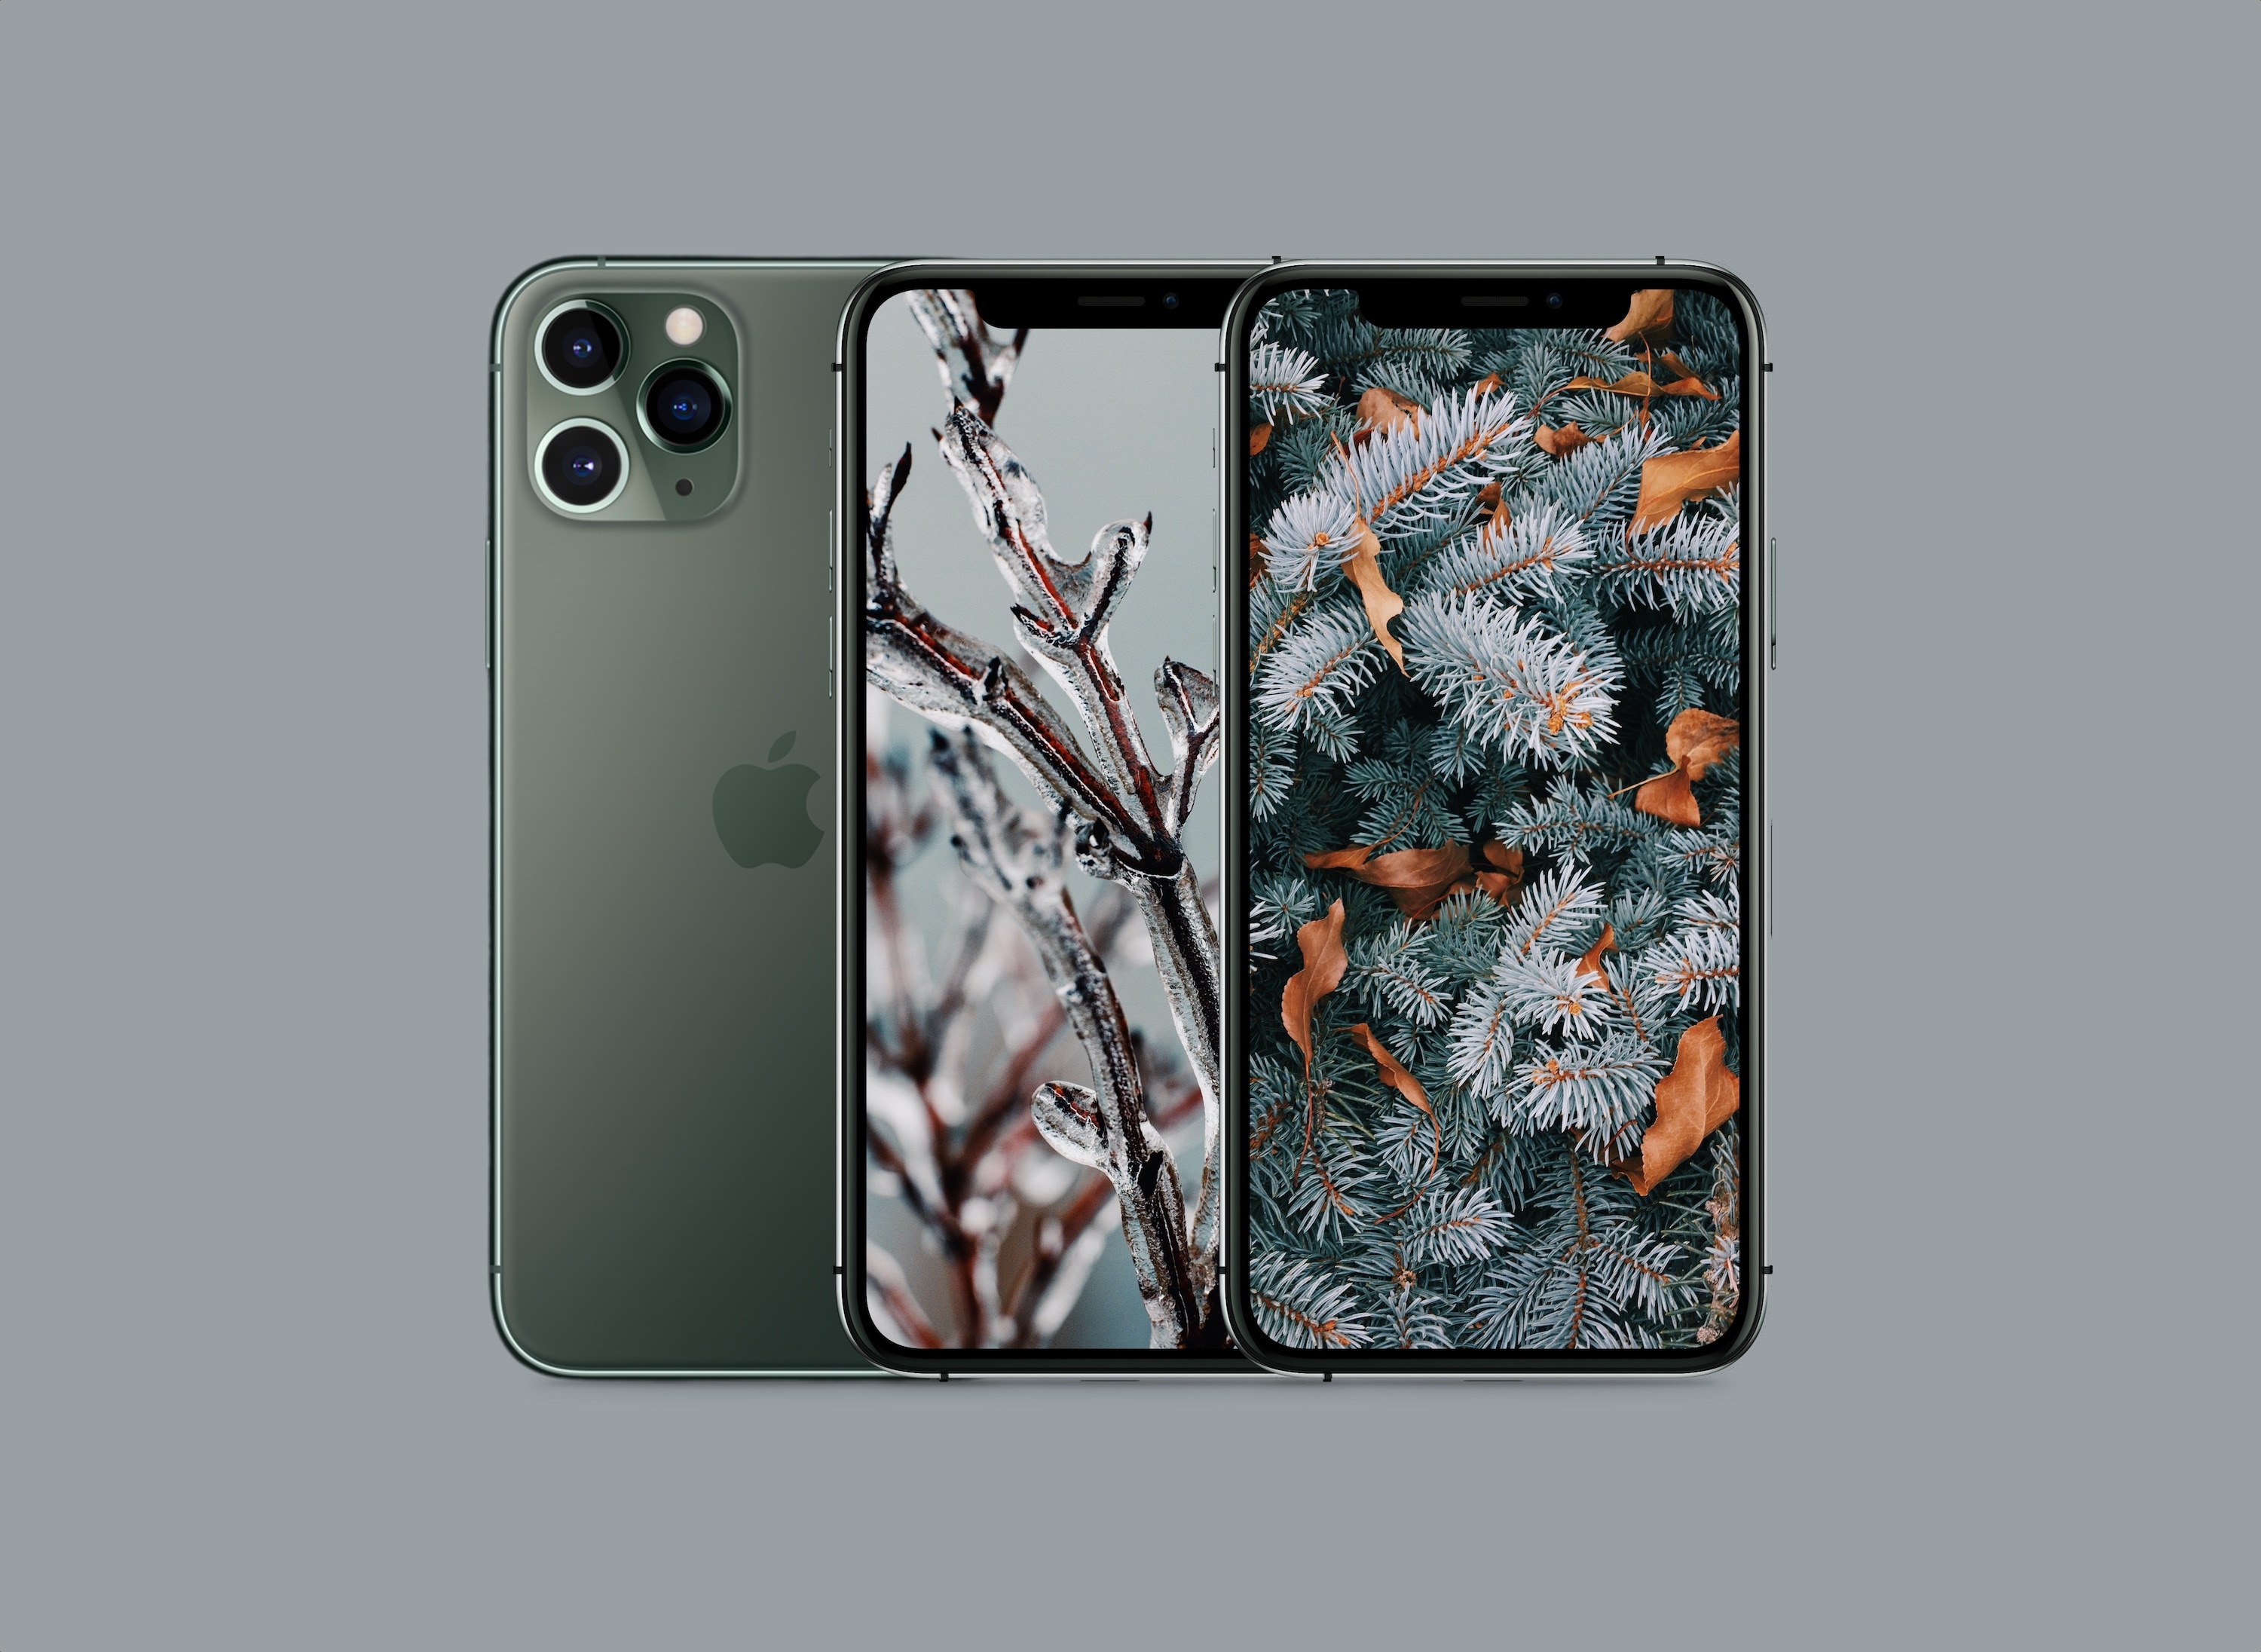 The beginning of winter wallpapers for iPhone